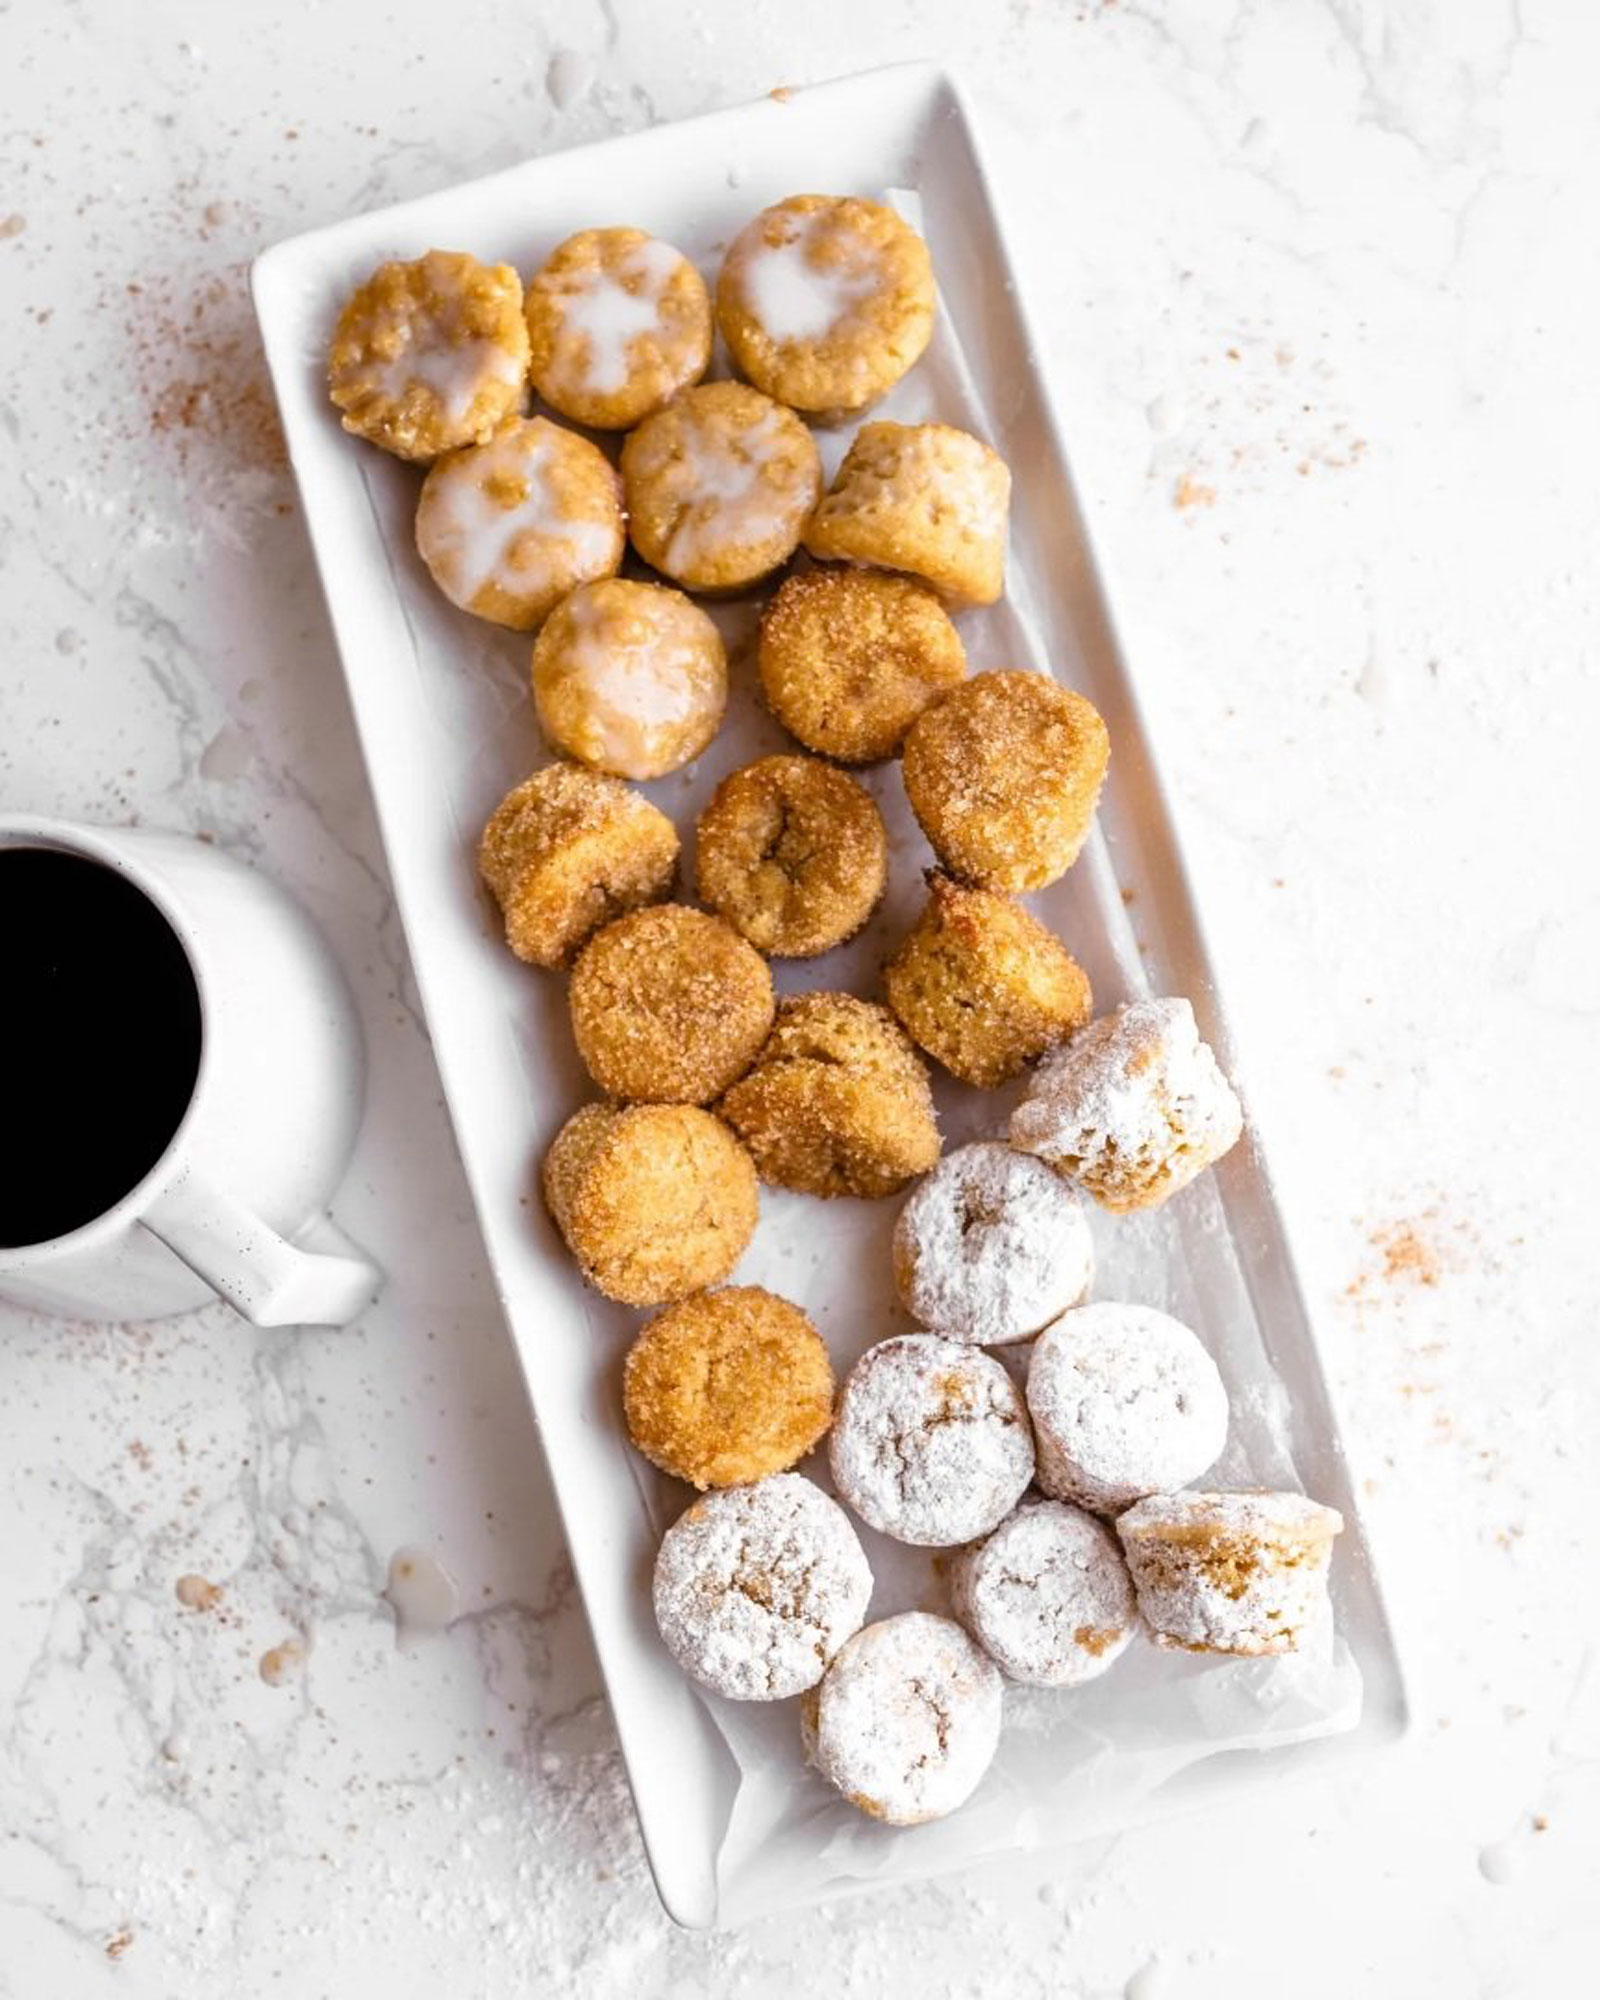 Grain-free, dairy-free donut holes from Stelle & Co Bakes